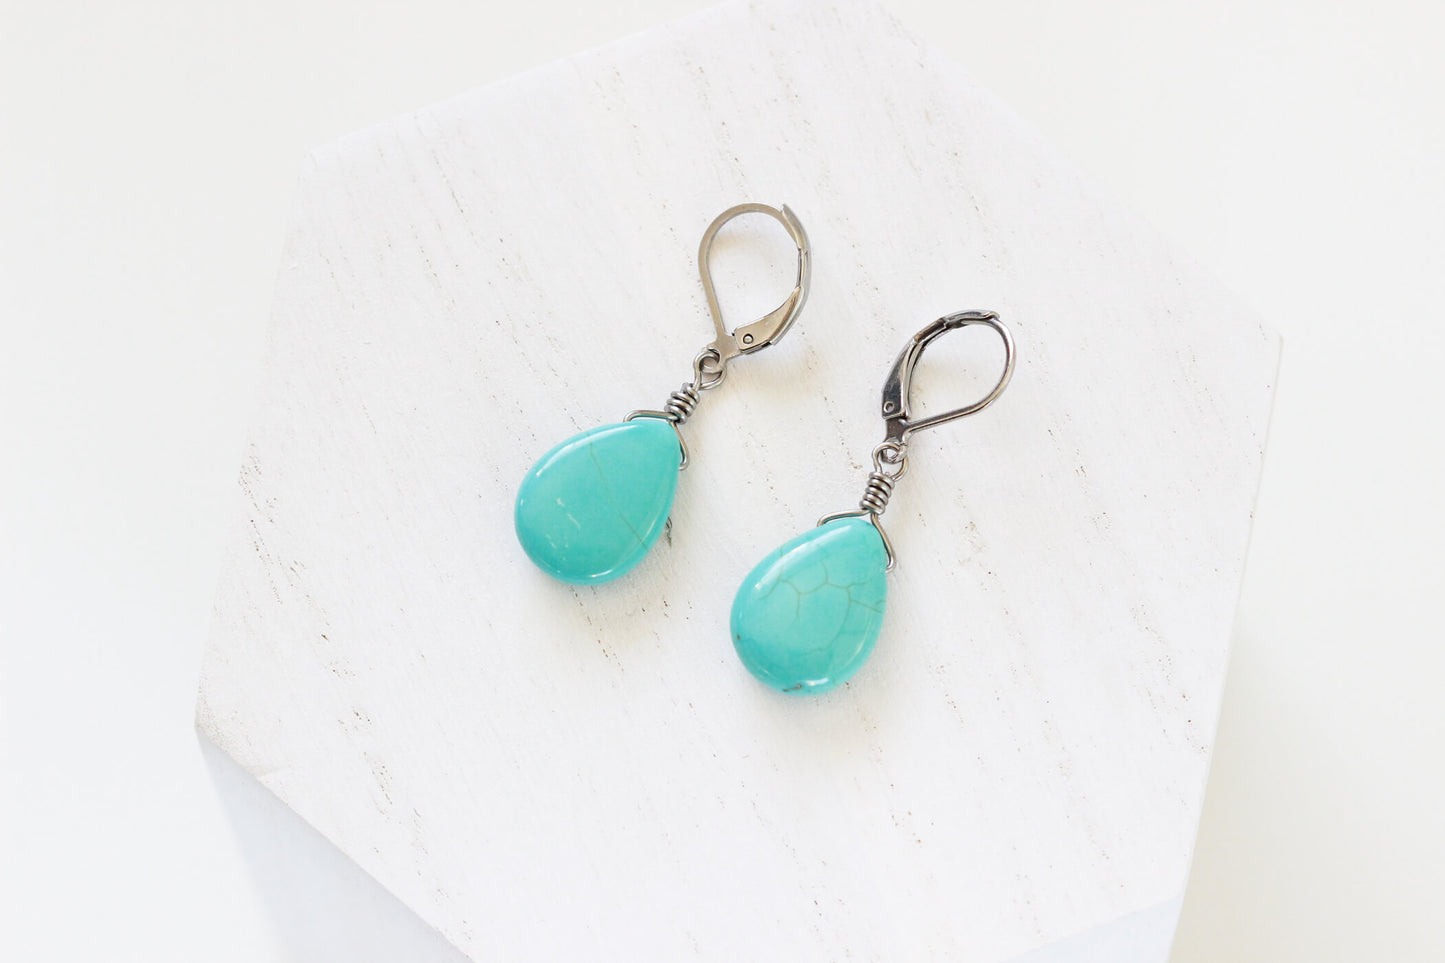 Turquoise Drop Earrings - Handmade Designer Jewelry by Kaleidoscopes And Polka Dots